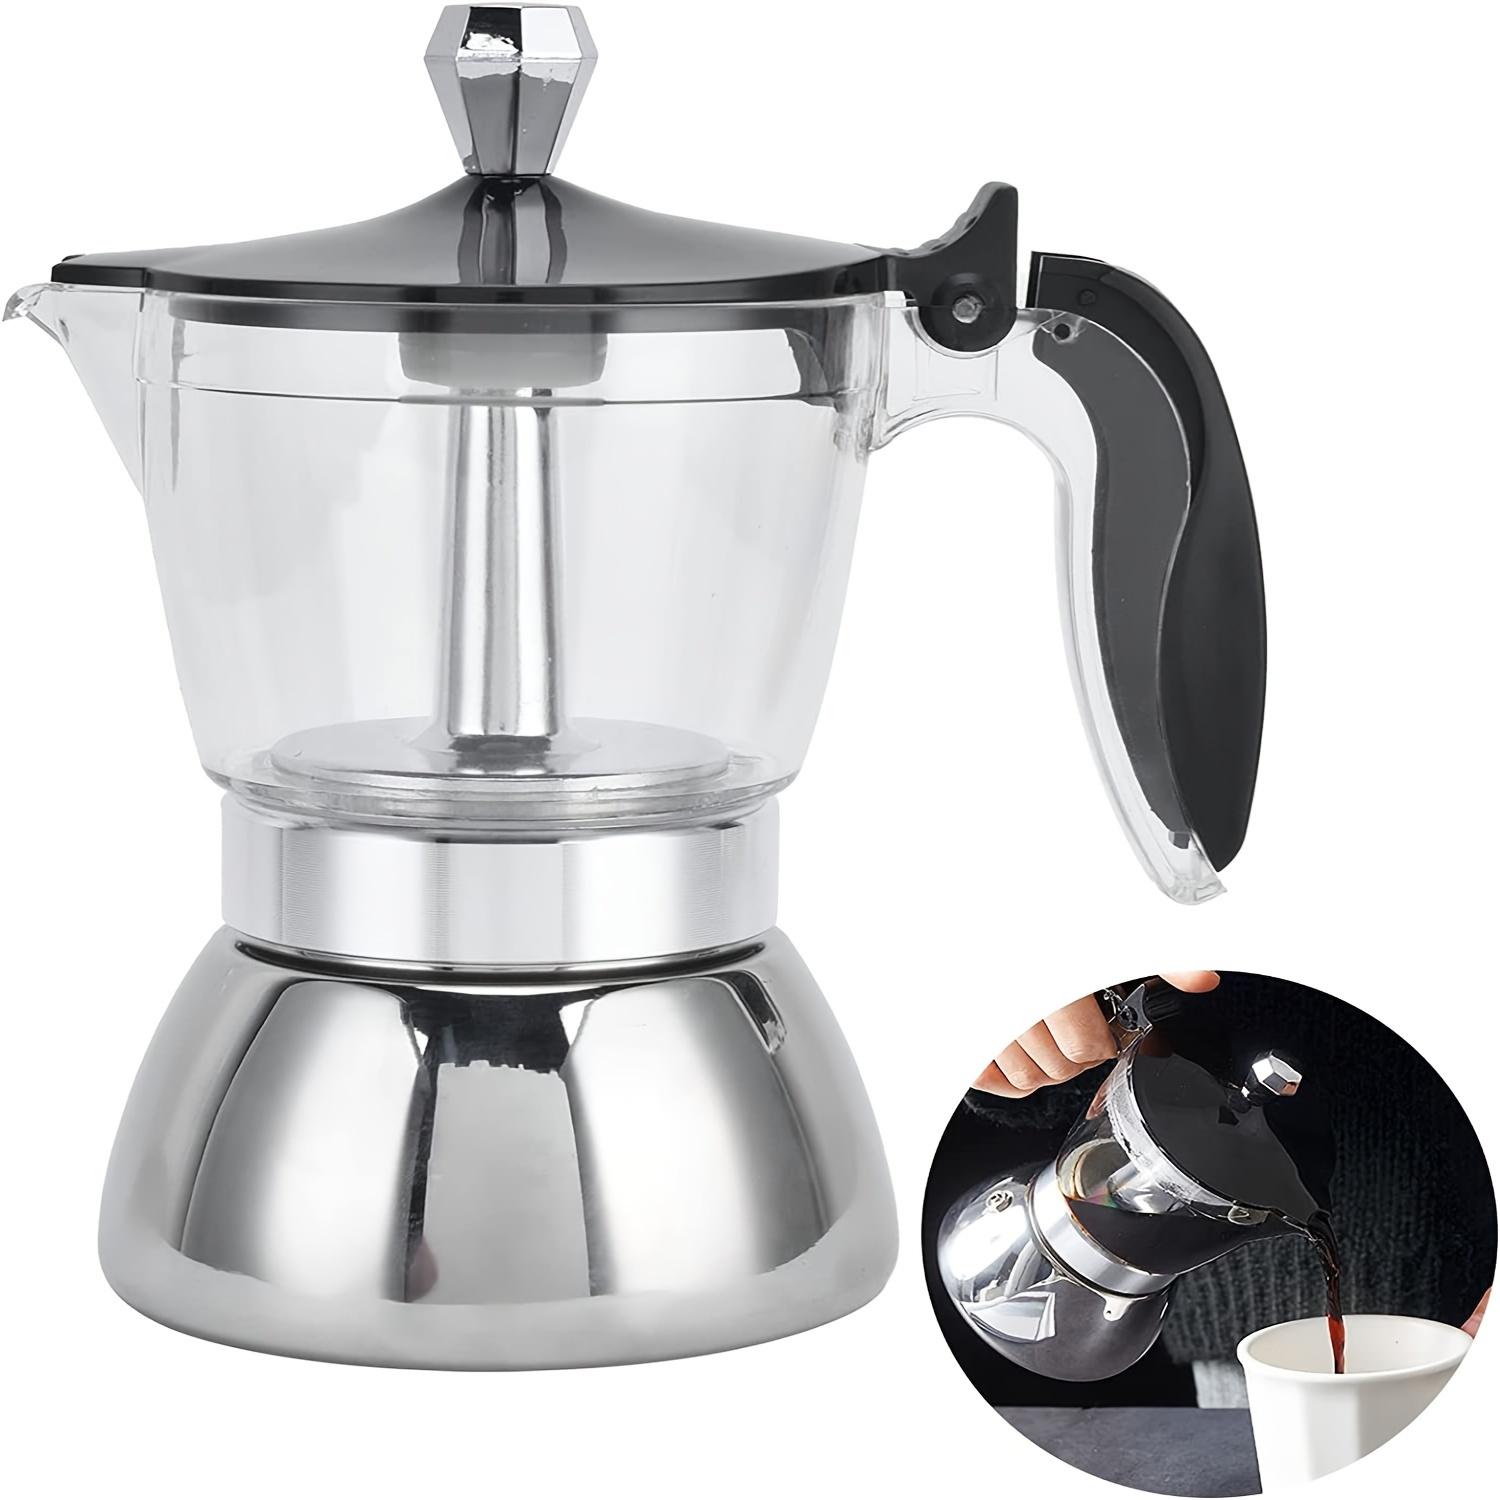 Stainless Steel Stovetop Moka Pot Espresso Maker Percolator 12 Cup 600ml  Portable Italian Greca Cuban Coffee Maker for Big Family Home Office  Camping